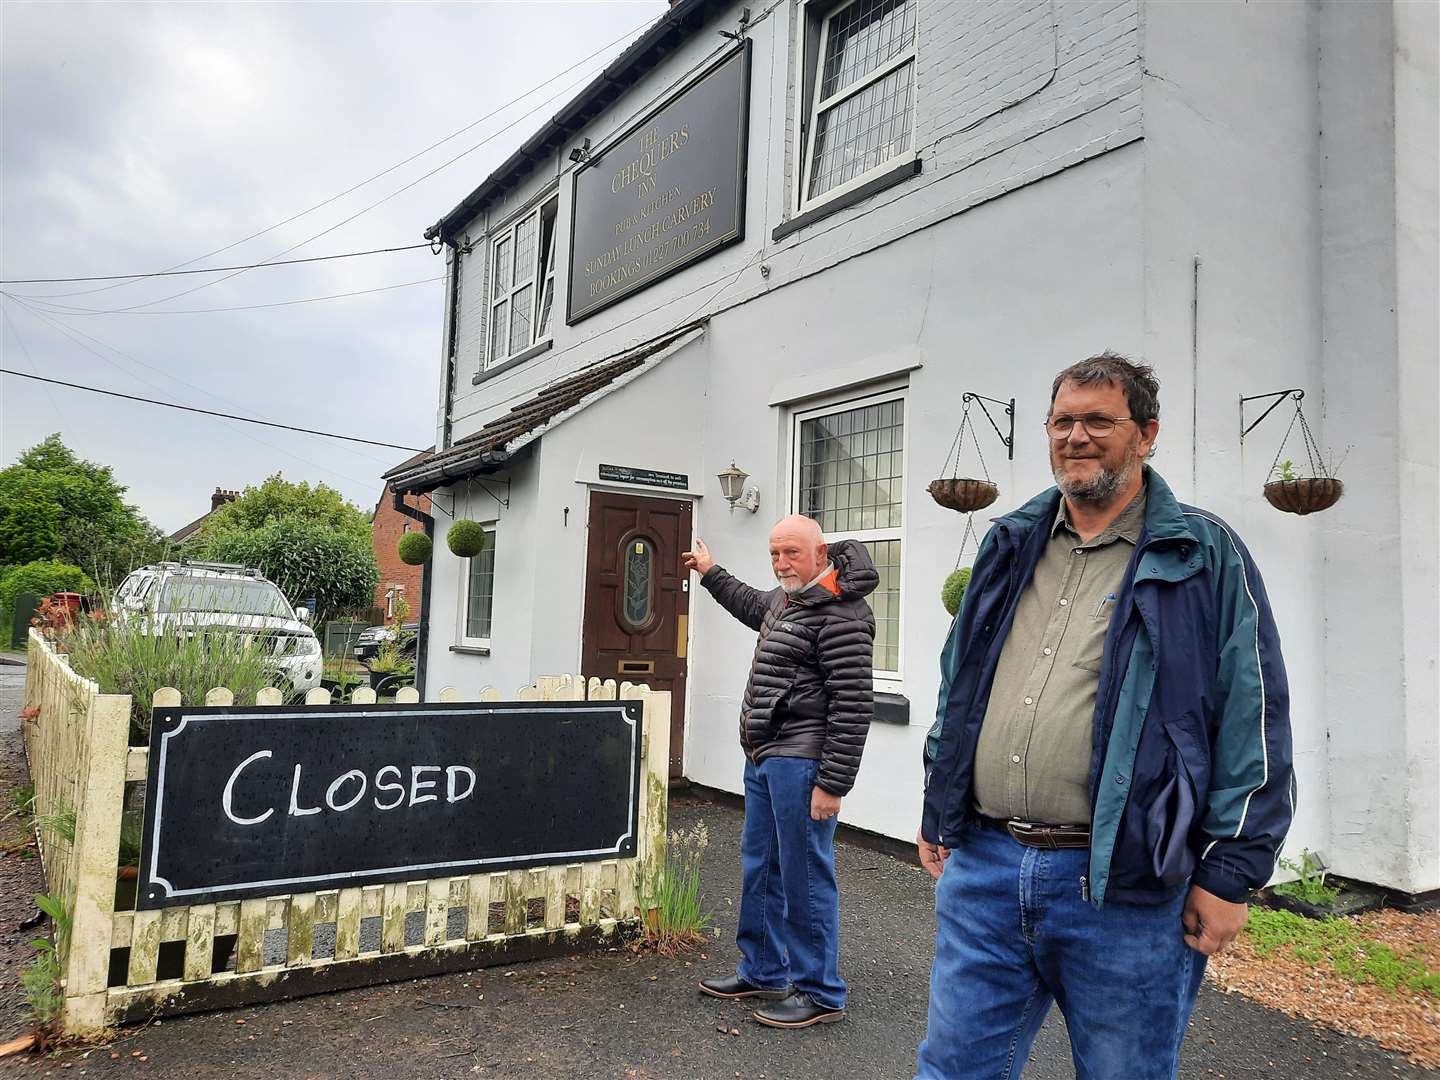 Norman Clark and Dave Henderson were two Petham parish councillors looking to take over the Chequers Inn in 2021